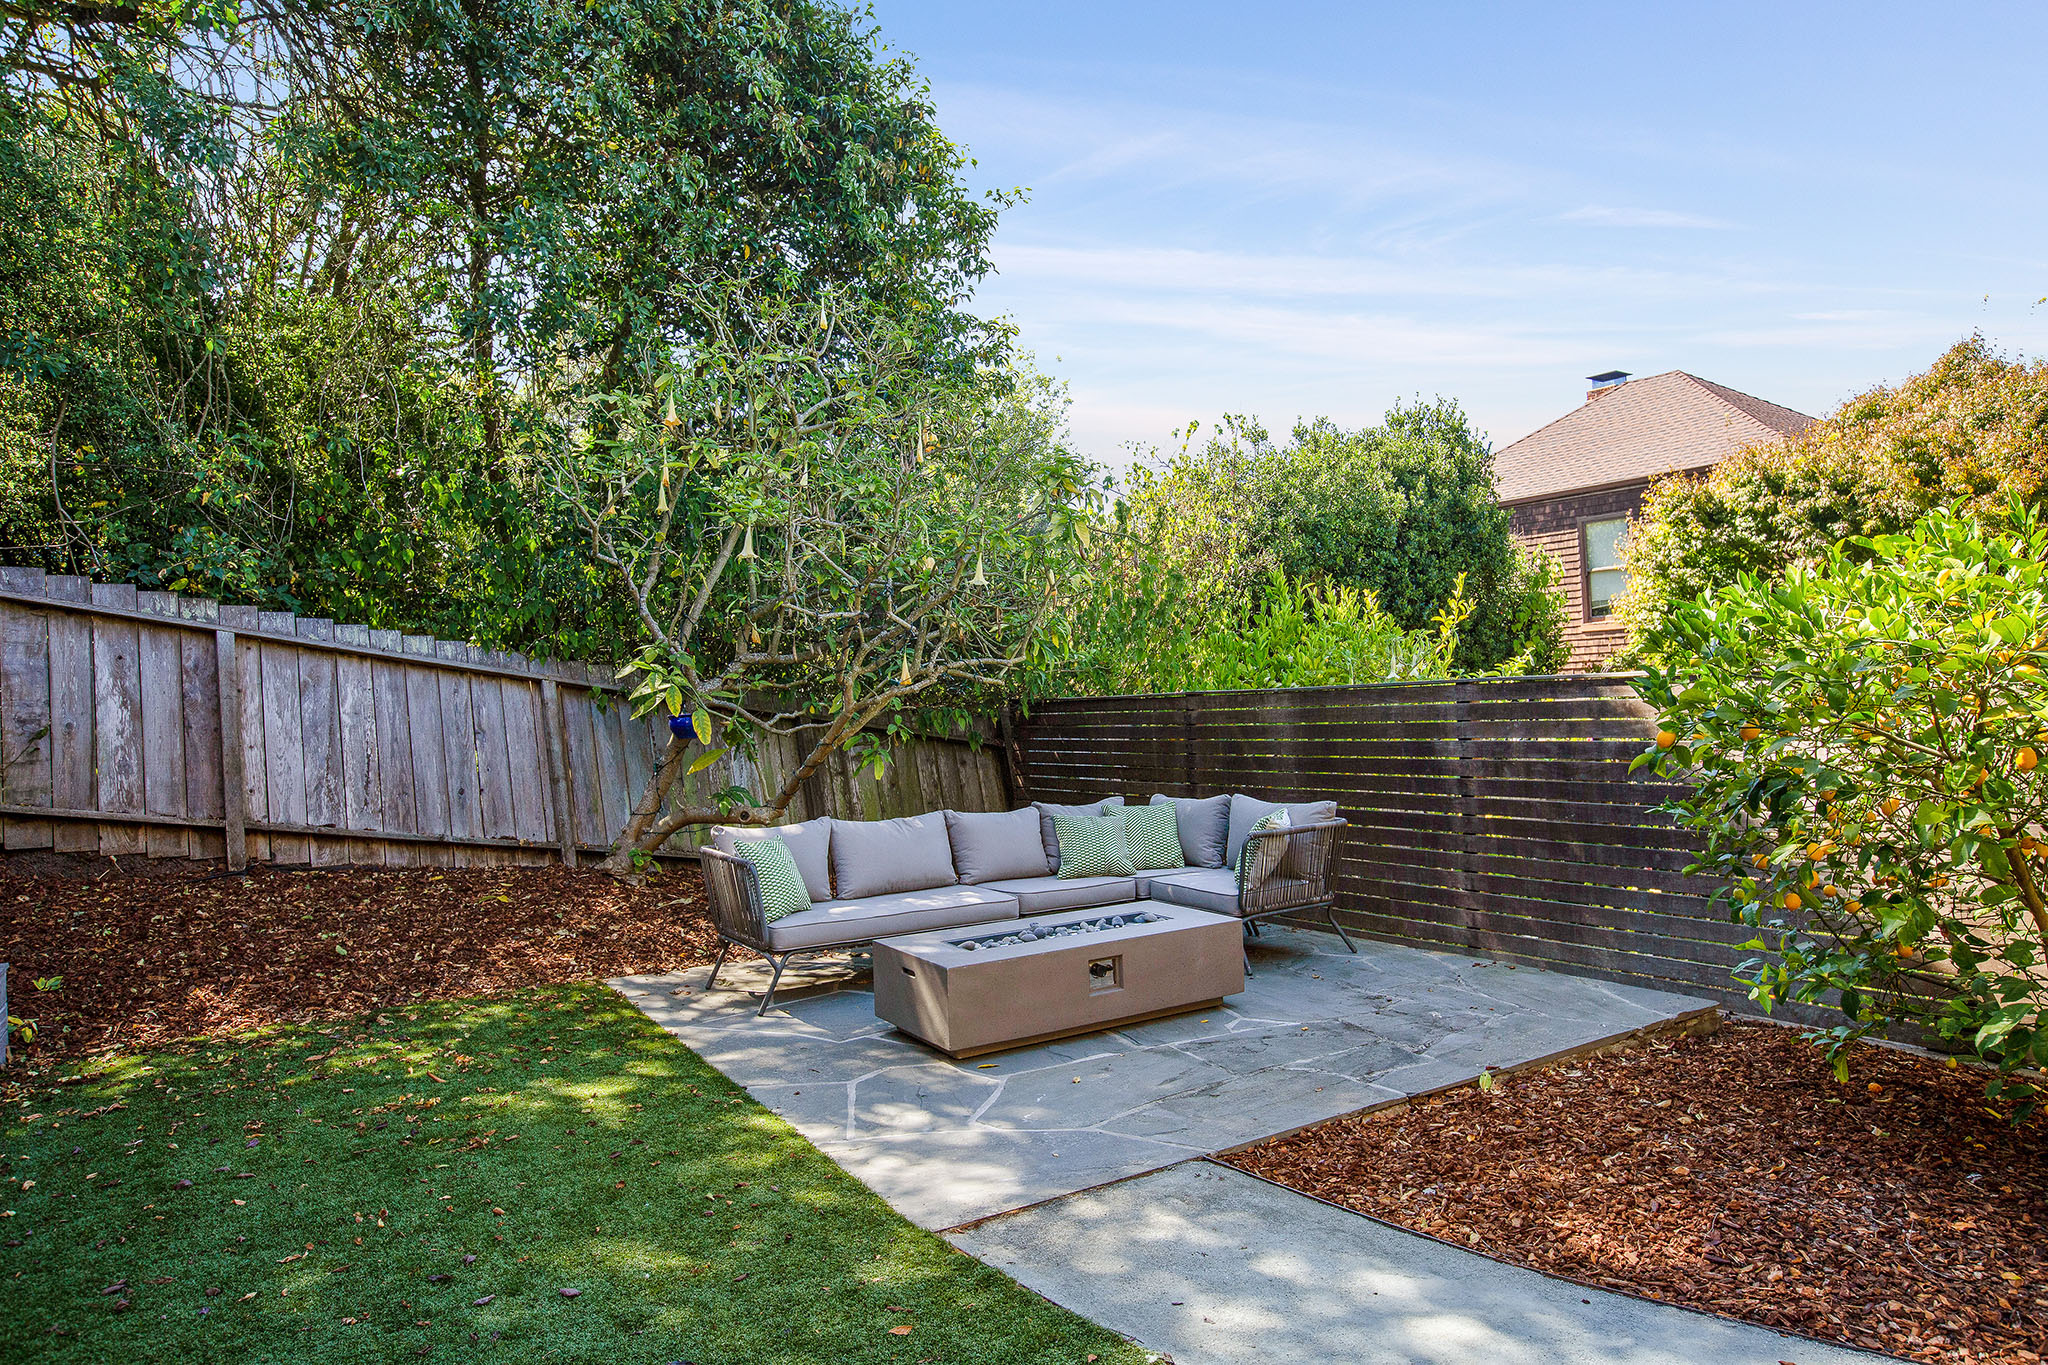 Property Photo: Yard, featuring a patio and out door living space